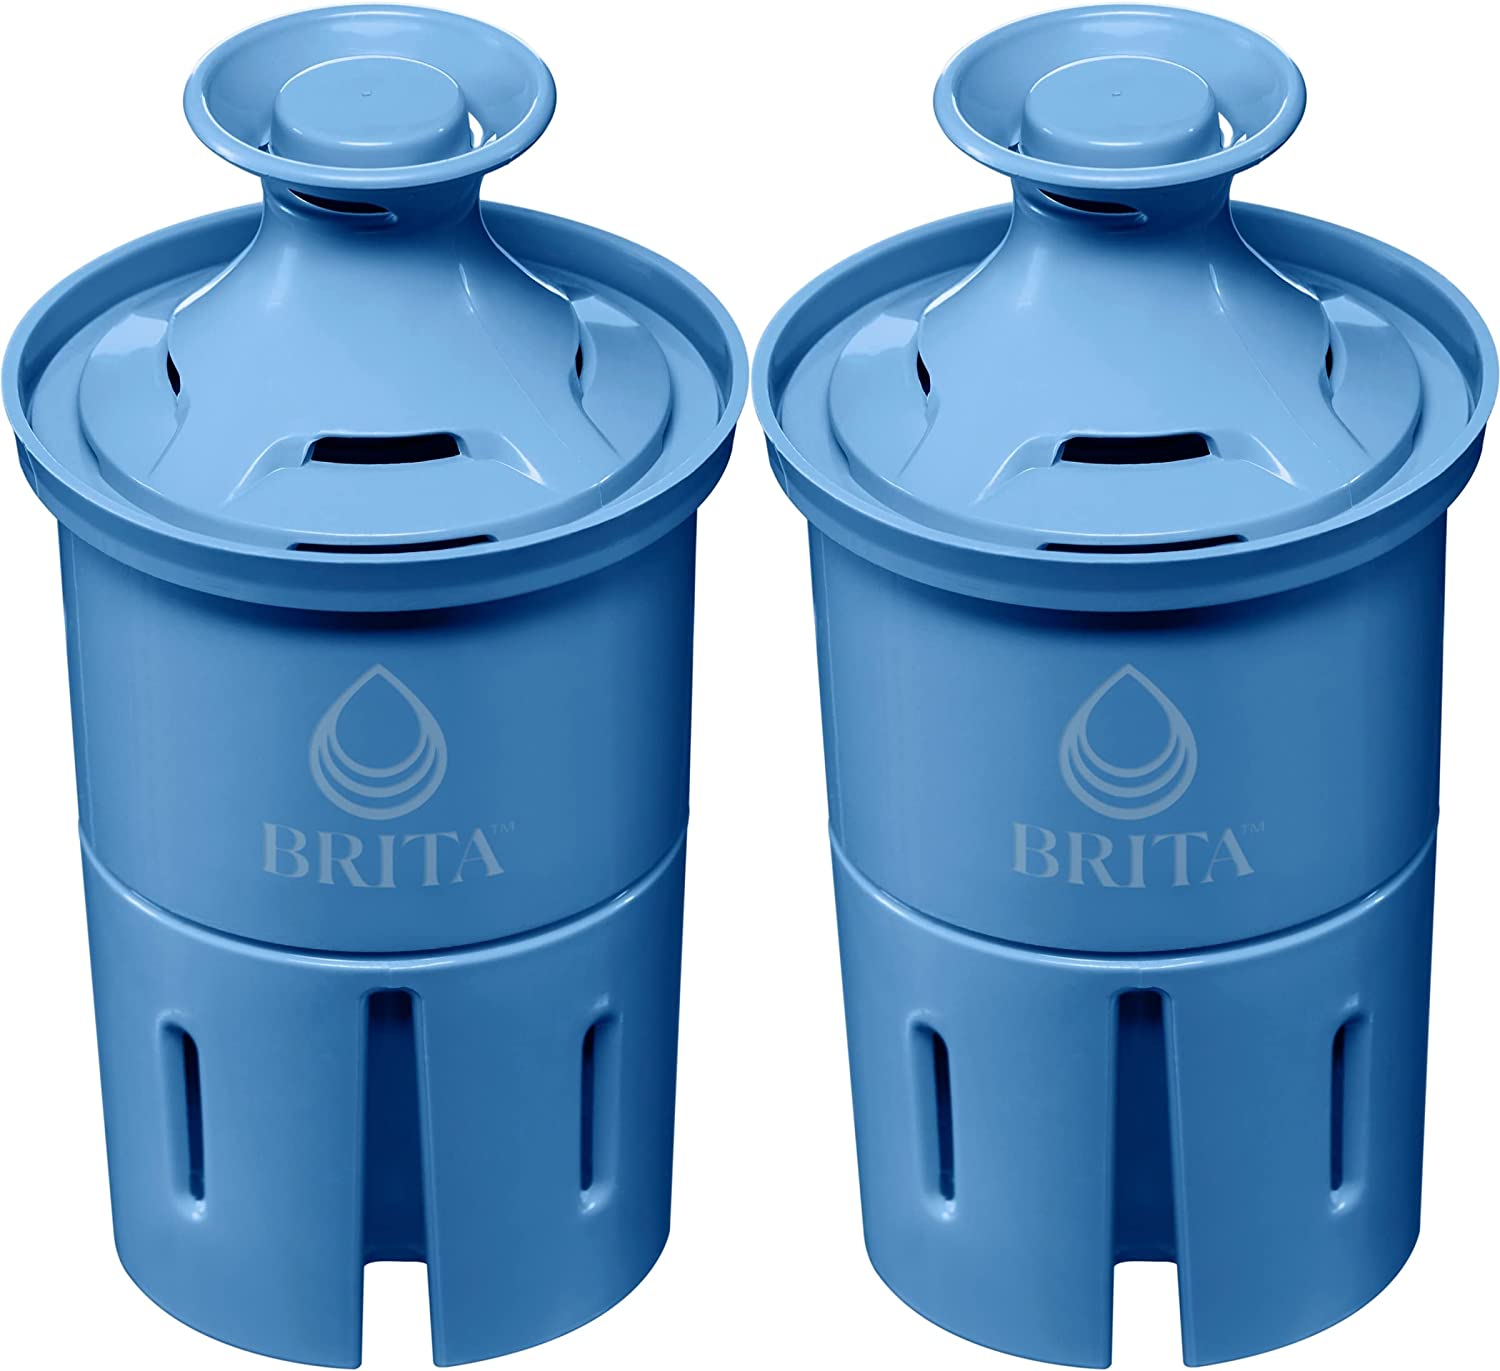 Brita Elite Water Filter, Advanced Carbon Core Technology Reduces 99% of Lead, Replacement Filter for Pitcher and Dispensers, Made Without BPA, 2 Count (Package May Vary)